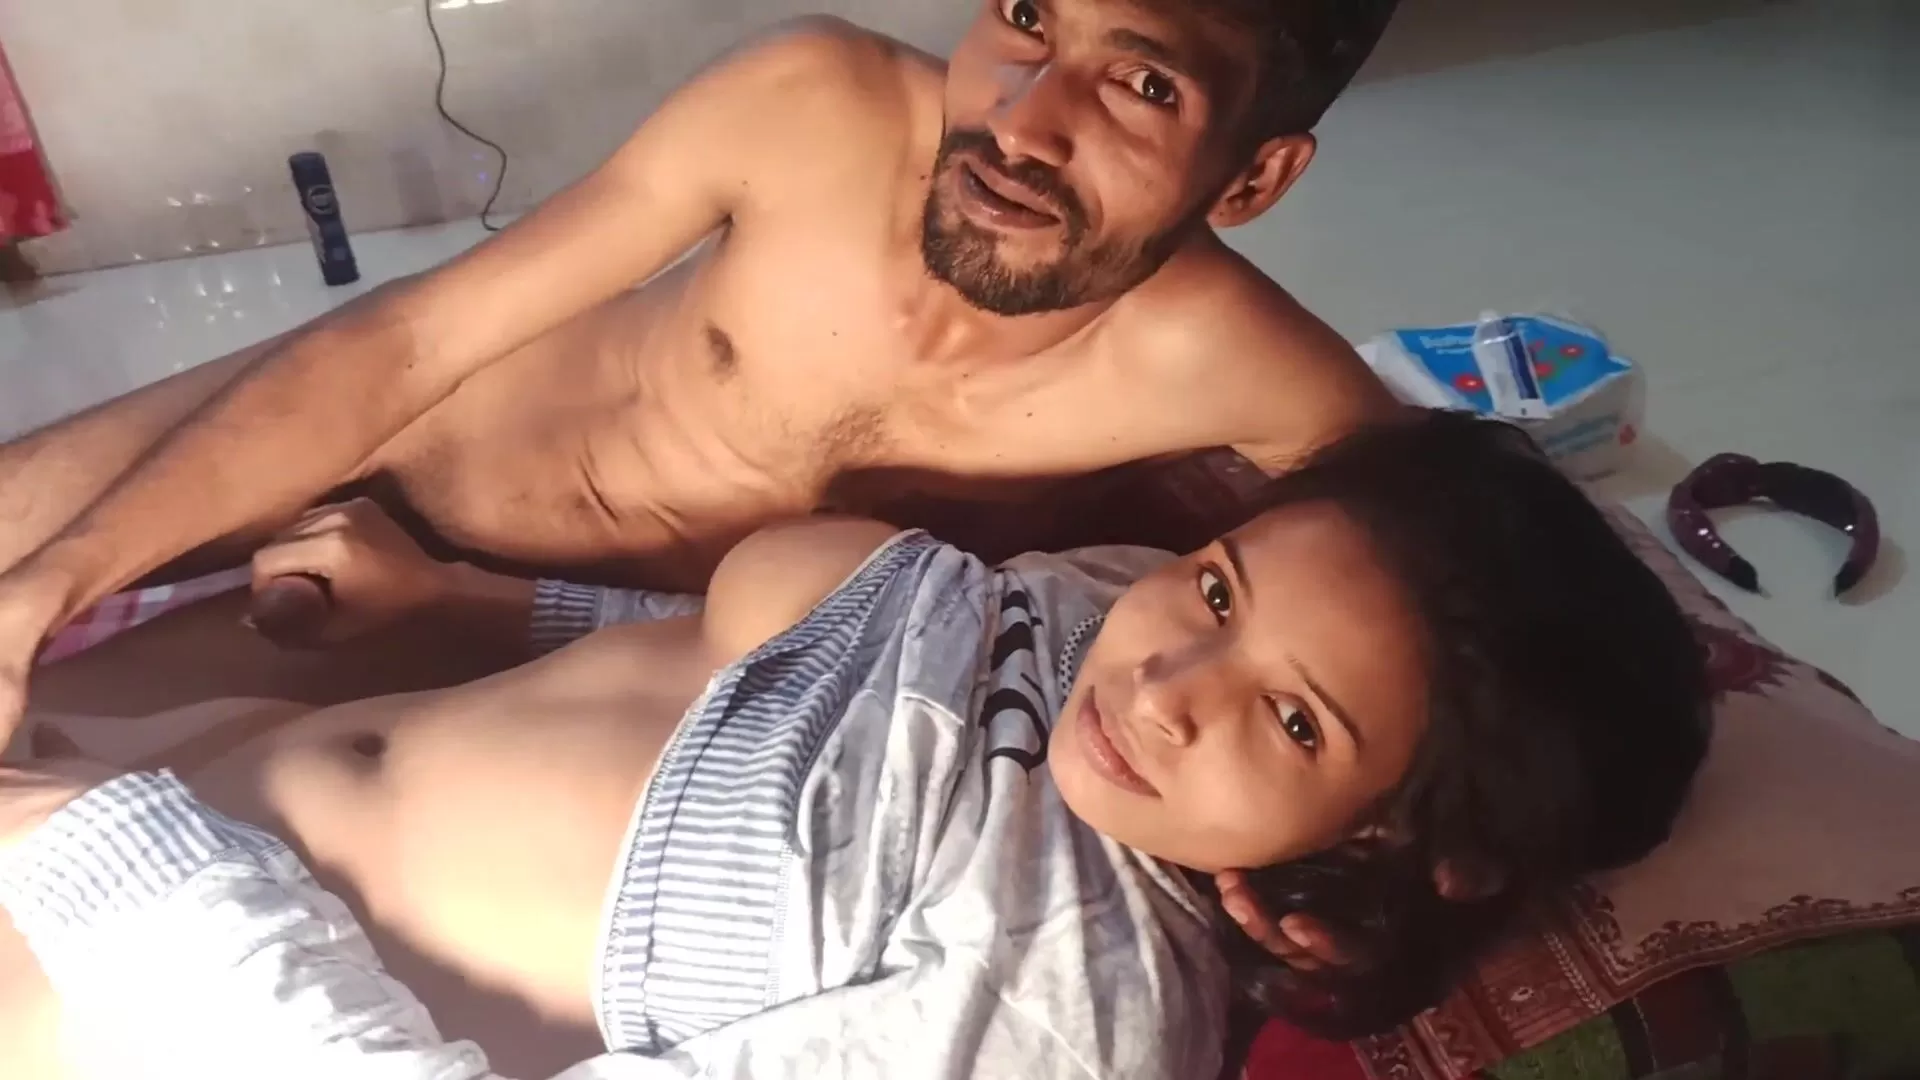 Swinger Couple Brings In Hot Inexperienced Cock To Play Bengali sex watch online picture